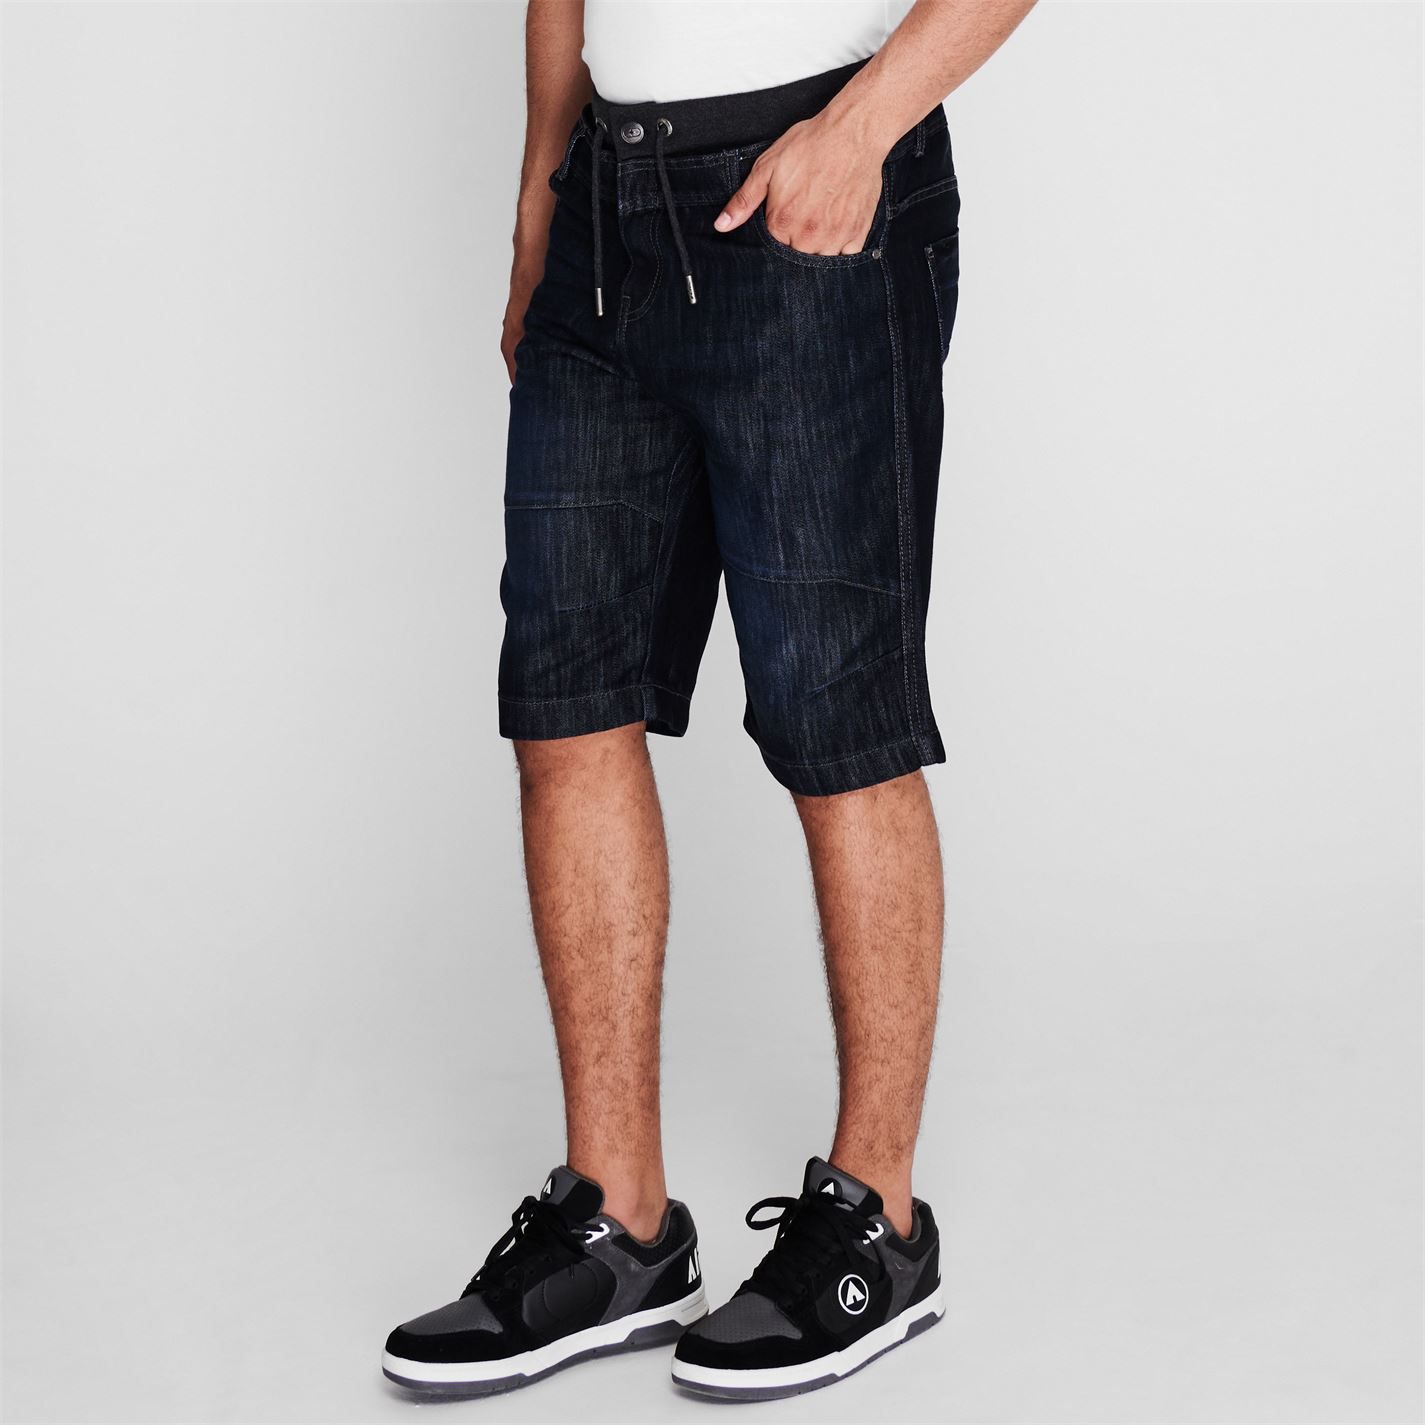 No Fear Double Waist Denim Shorts  Update your Spring/Summer wardrobe with the No Fear Double Waist Denim Shorts from No Fear. Crafted with an abundance of pockets and classic belt loops, these bottoms are perfect for casual days.